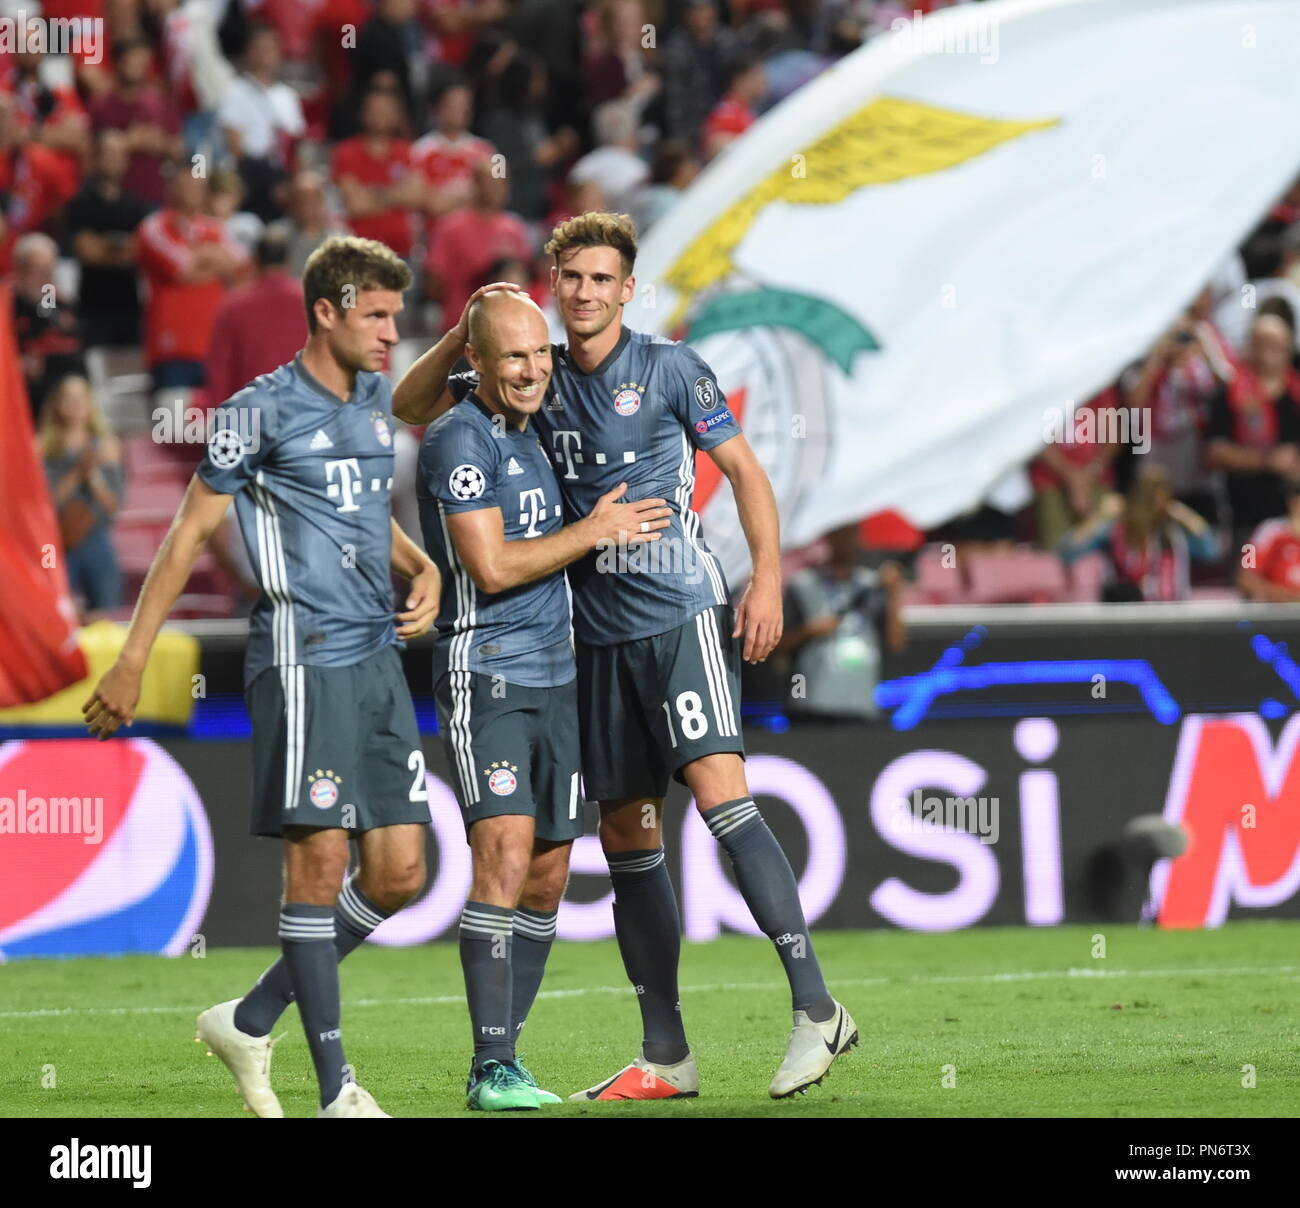 Lisbon, Portugal. 19th Sep, 2018. Players of Bayern celebrate after the UEFA Champions League Group E match between between SL Benfica and FC Bayern Munchen at Luz Stadium in Lisbon, Portugal, on Sept. 19, 2018. Bayern won 2-0. Credit: Zhang Yadong/Xinhua/Alamy Live News Stock Photo